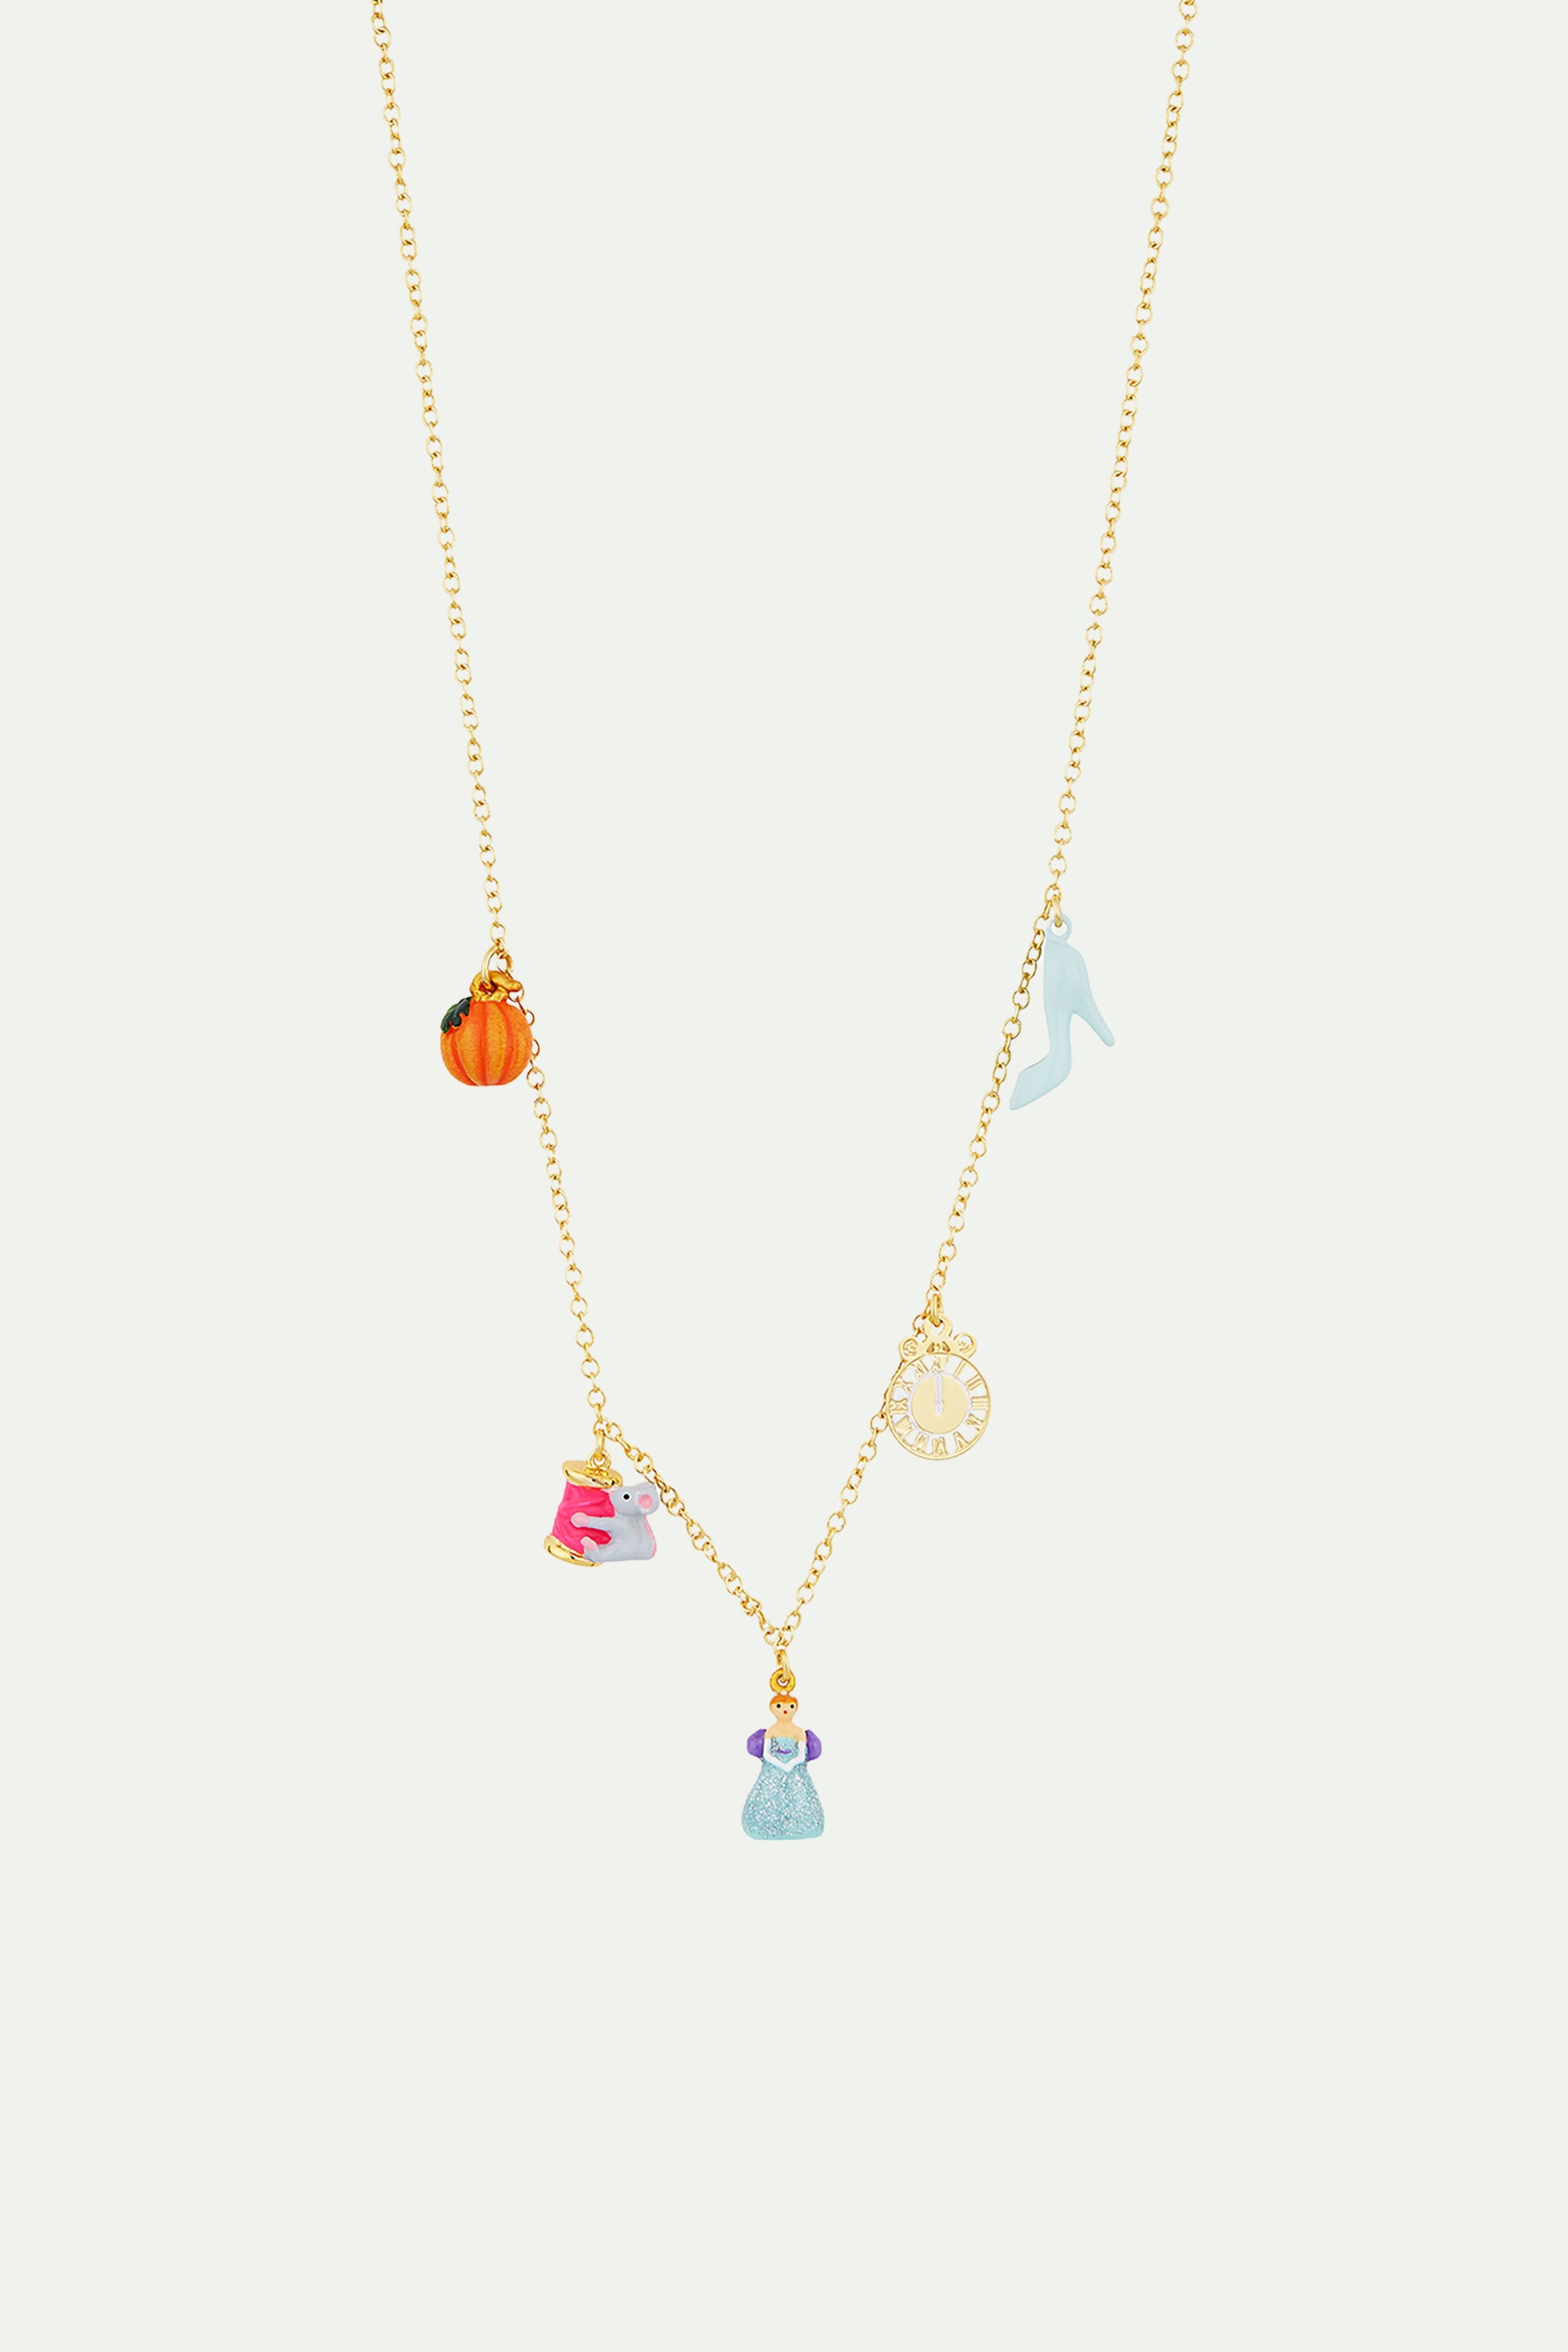 Pumpkin, Spool of Thread and Mouse, Cinderella, Clock and Slipper pendant necklace